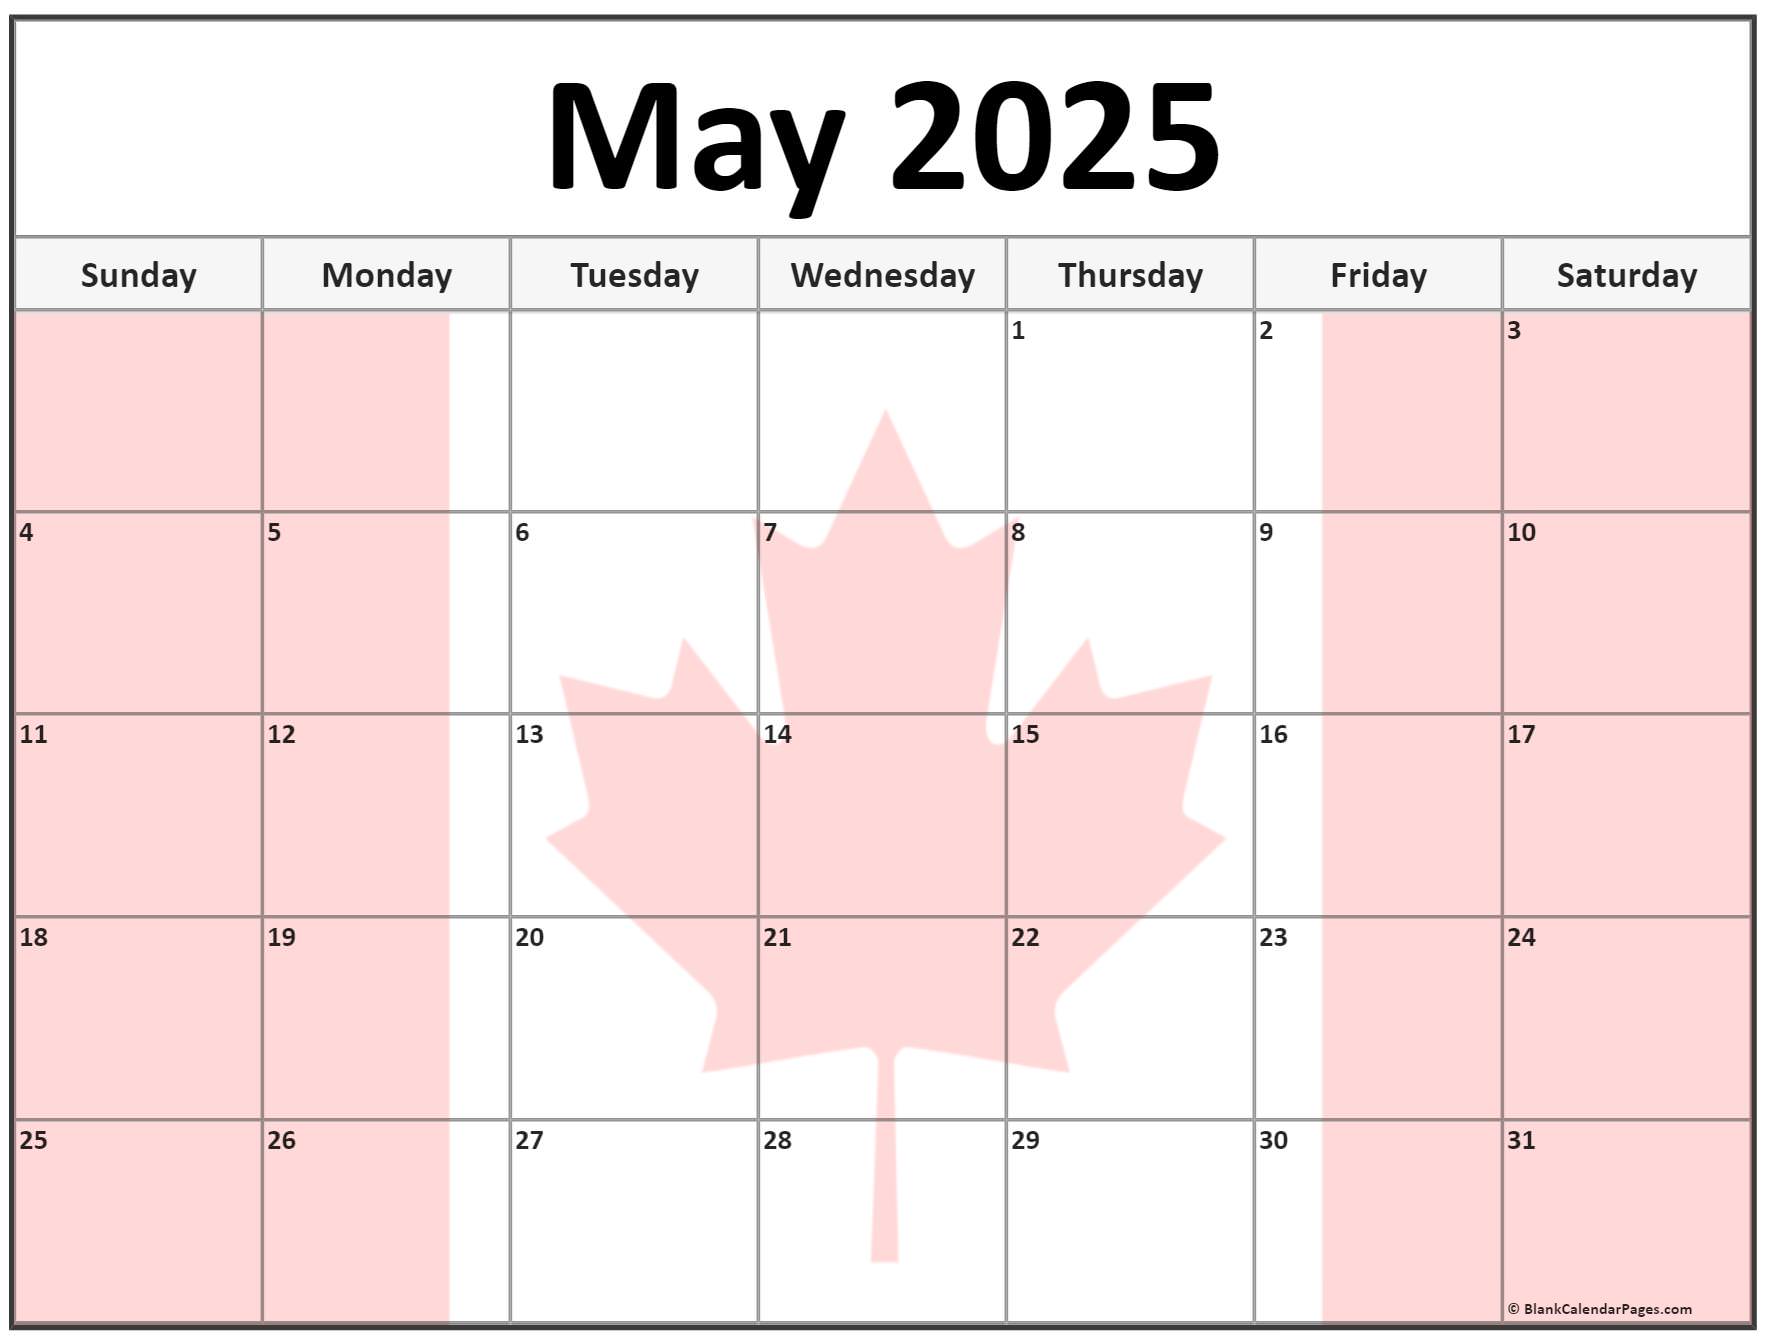 Collection of May 2025 photo calendars with image filters.